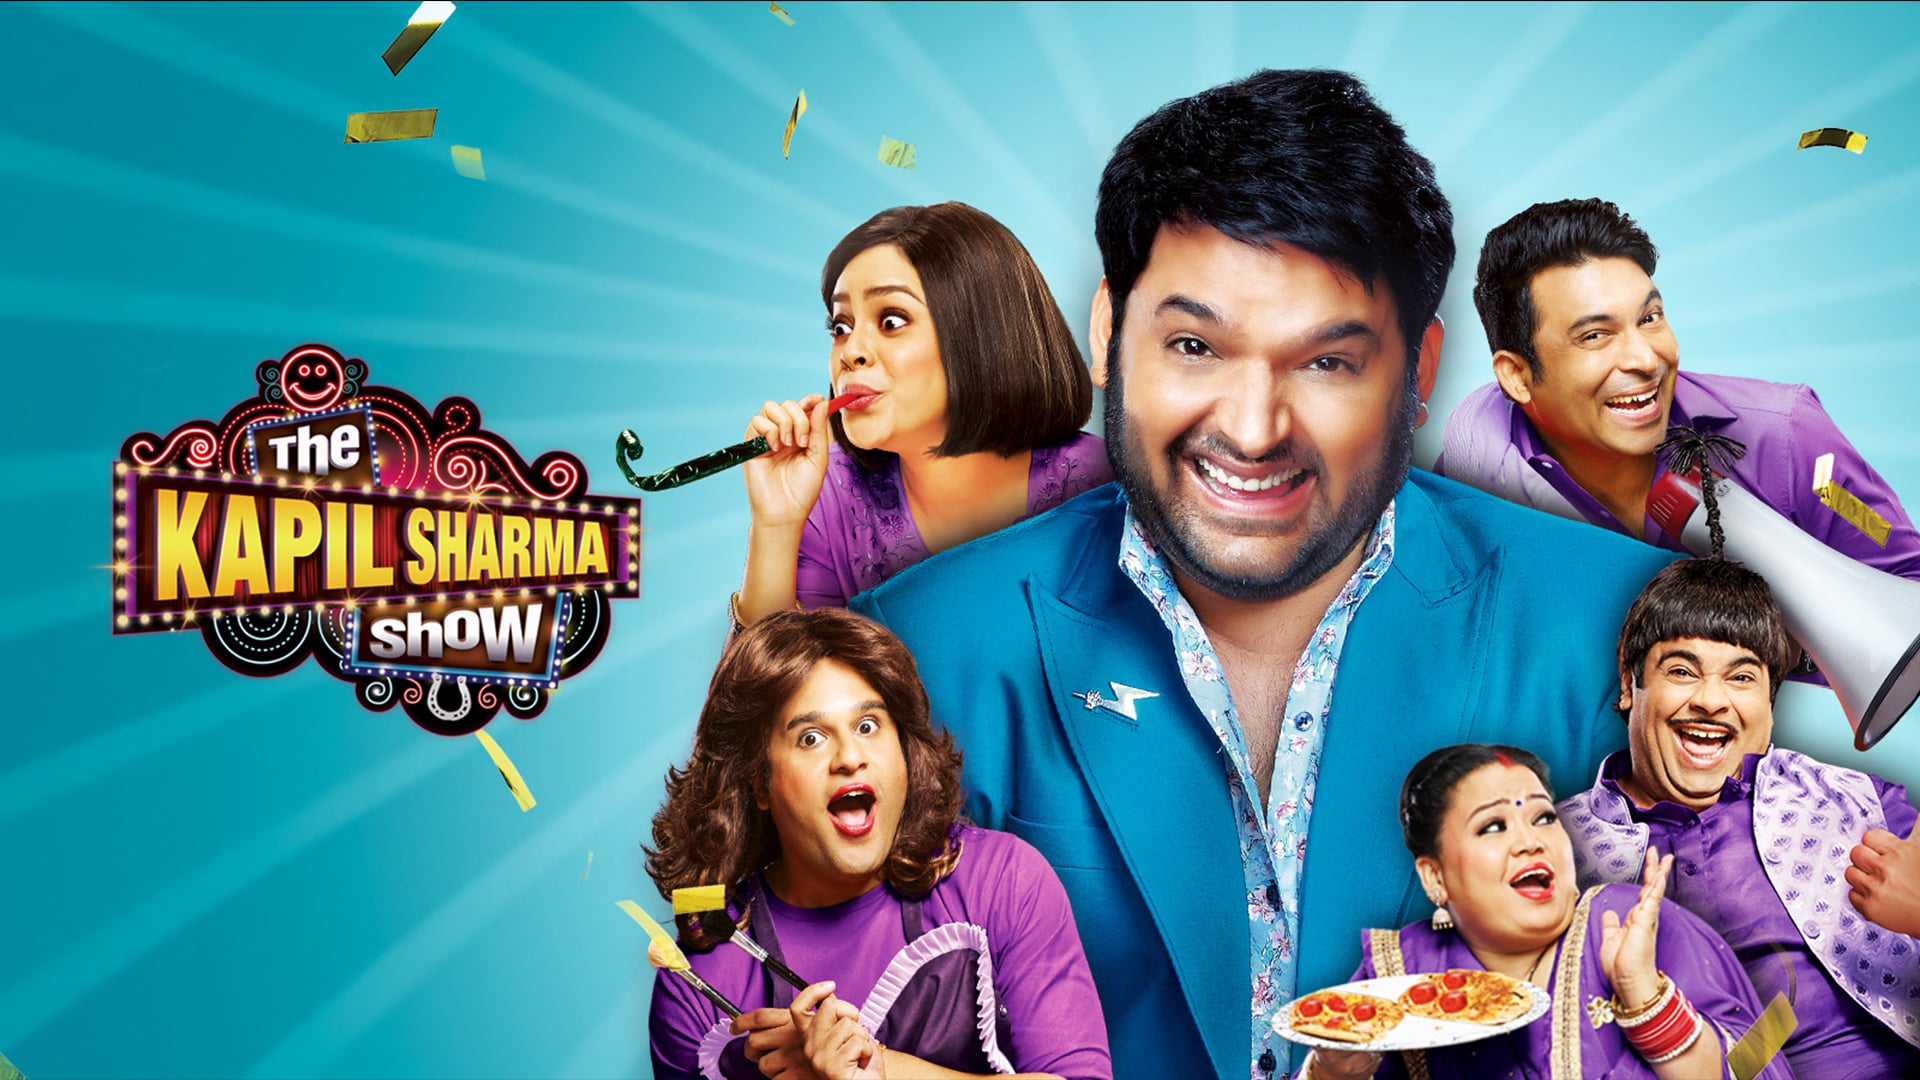 The Kapil Sharma Show - Season 2 Episode 16 : The Dhamaal Continues